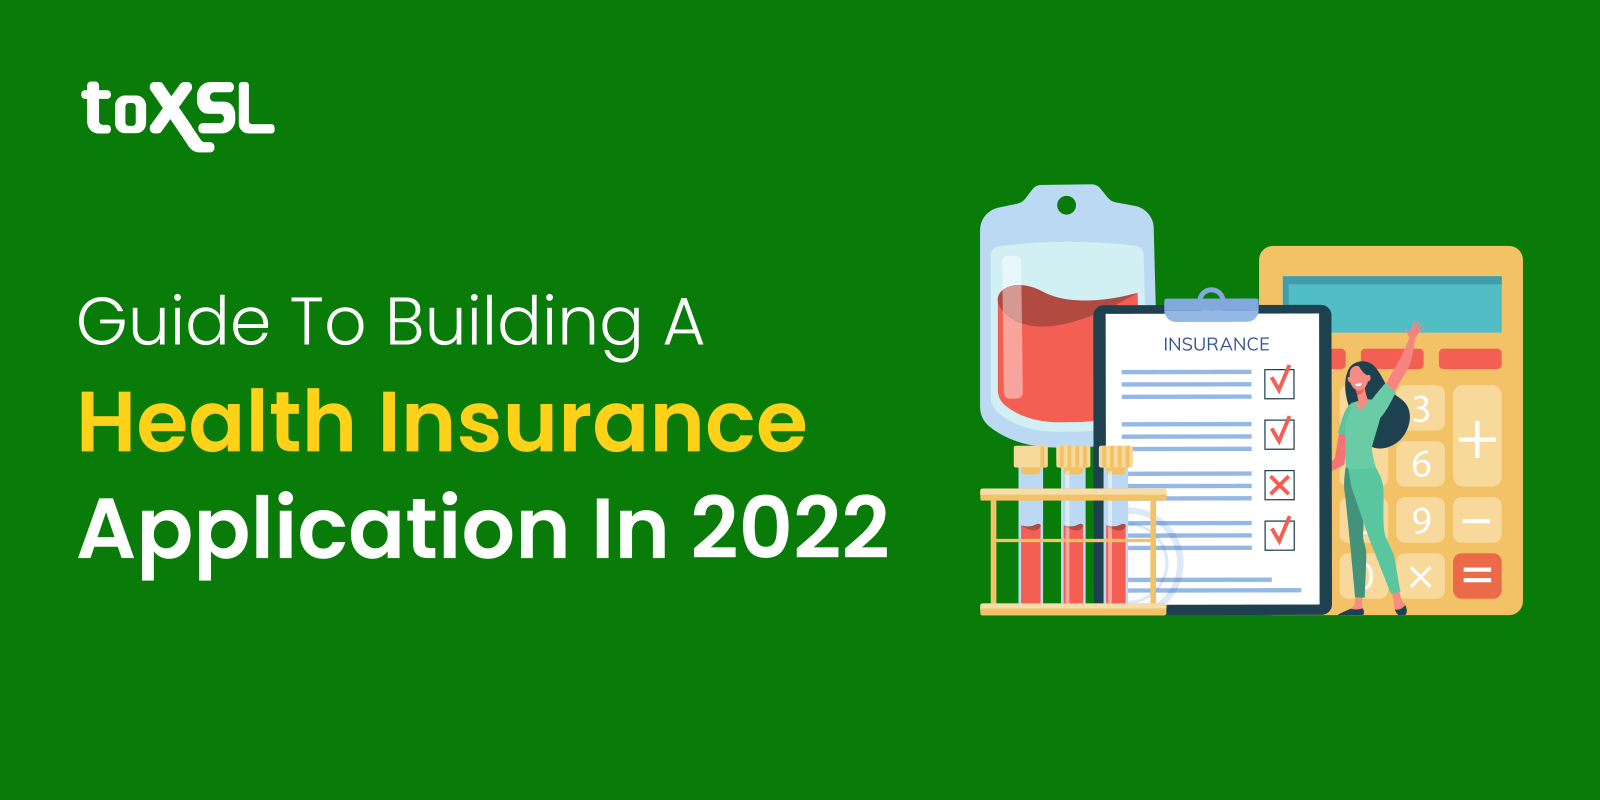 Guide To Building A Health Insurance Application In 2022